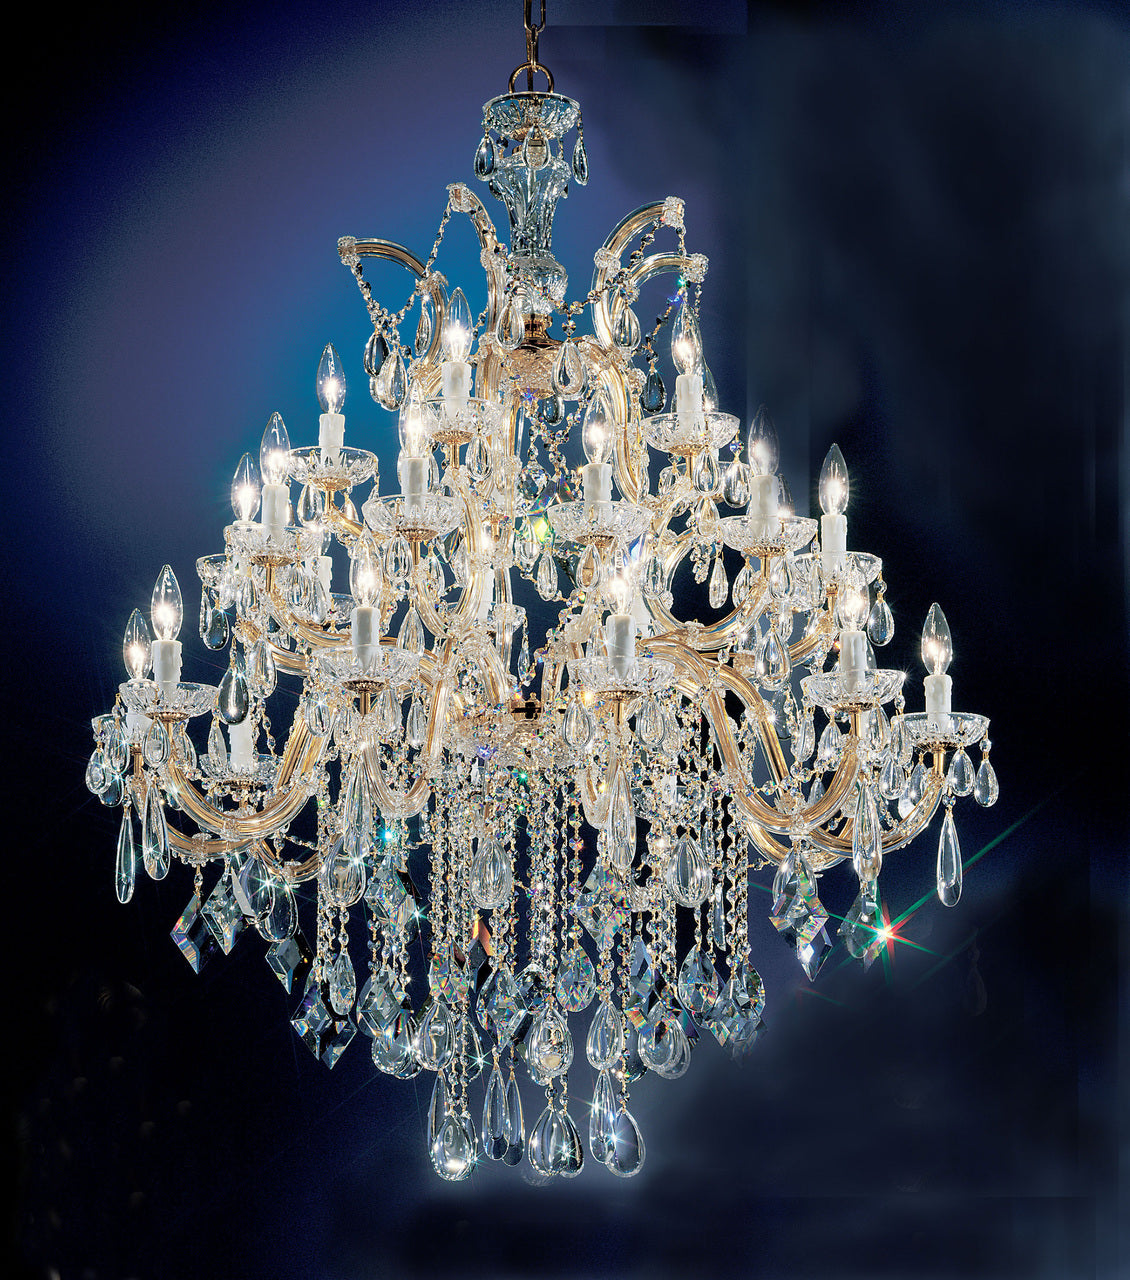 Classic Lighting 8359 GP C Rialto Contemporary Crystal Chandelier in Gold